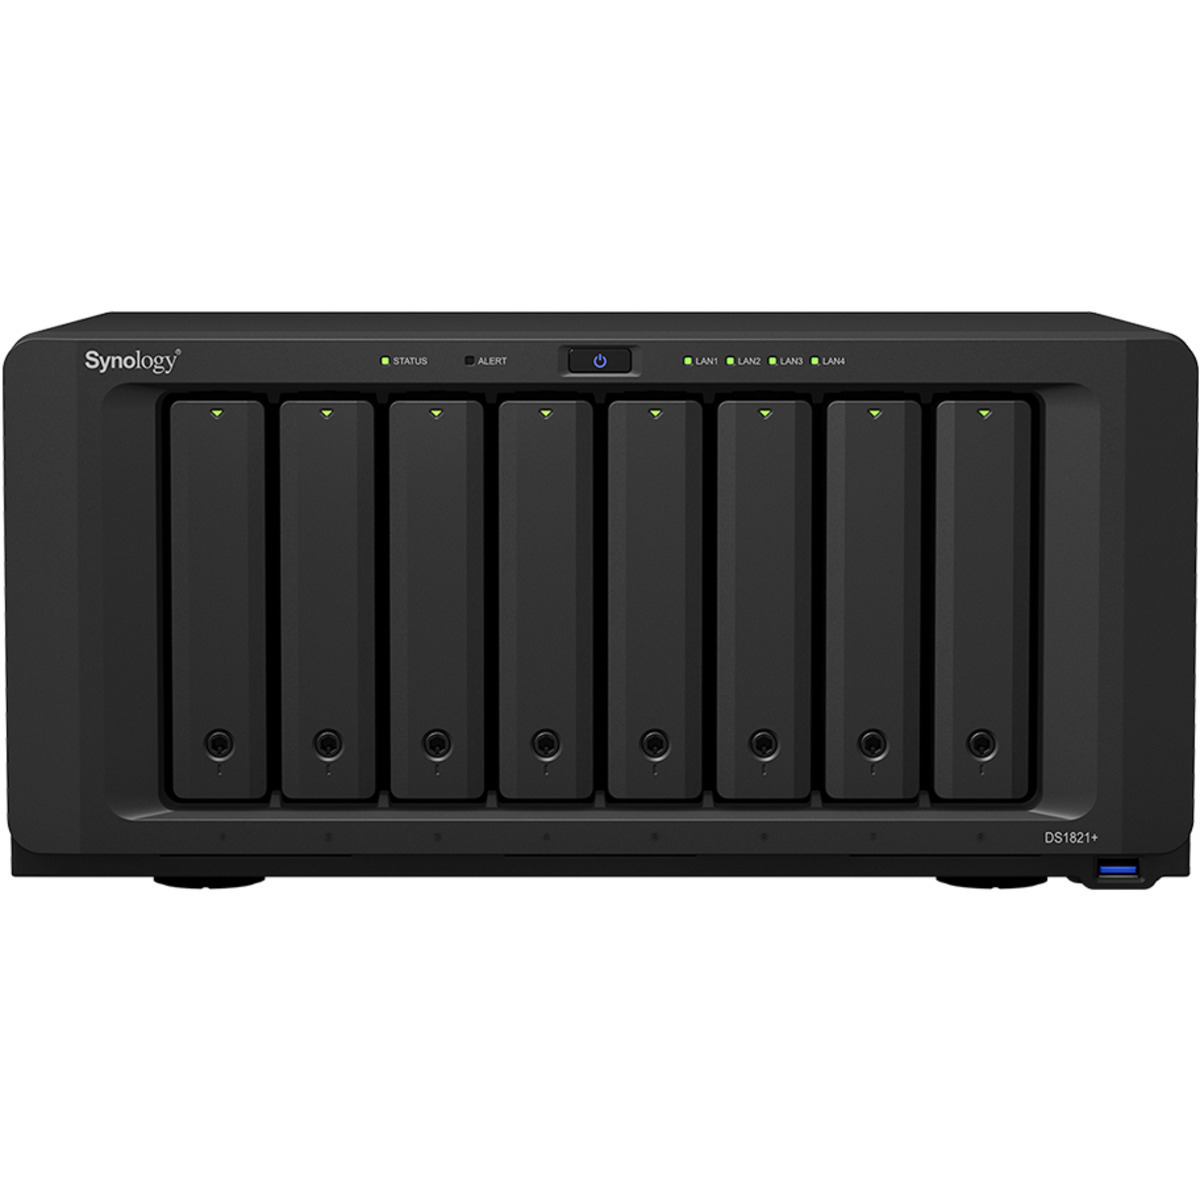 buy Synology DiskStation DS1821+ 192tb Desktop NAS - Network Attached Storage Device 8x24000gb Western Digital Ultrastar HC580 WUH722424ALE6L4 3.5 7200rpm SATA 6Gb/s HDD ENTERPRISE Class Drives Installed - Burn-In Tested - FREE RAM UPGRADE - nas headquarters buy network attached storage server device das new raid-5 free shipping simply usa DiskStation DS1821+